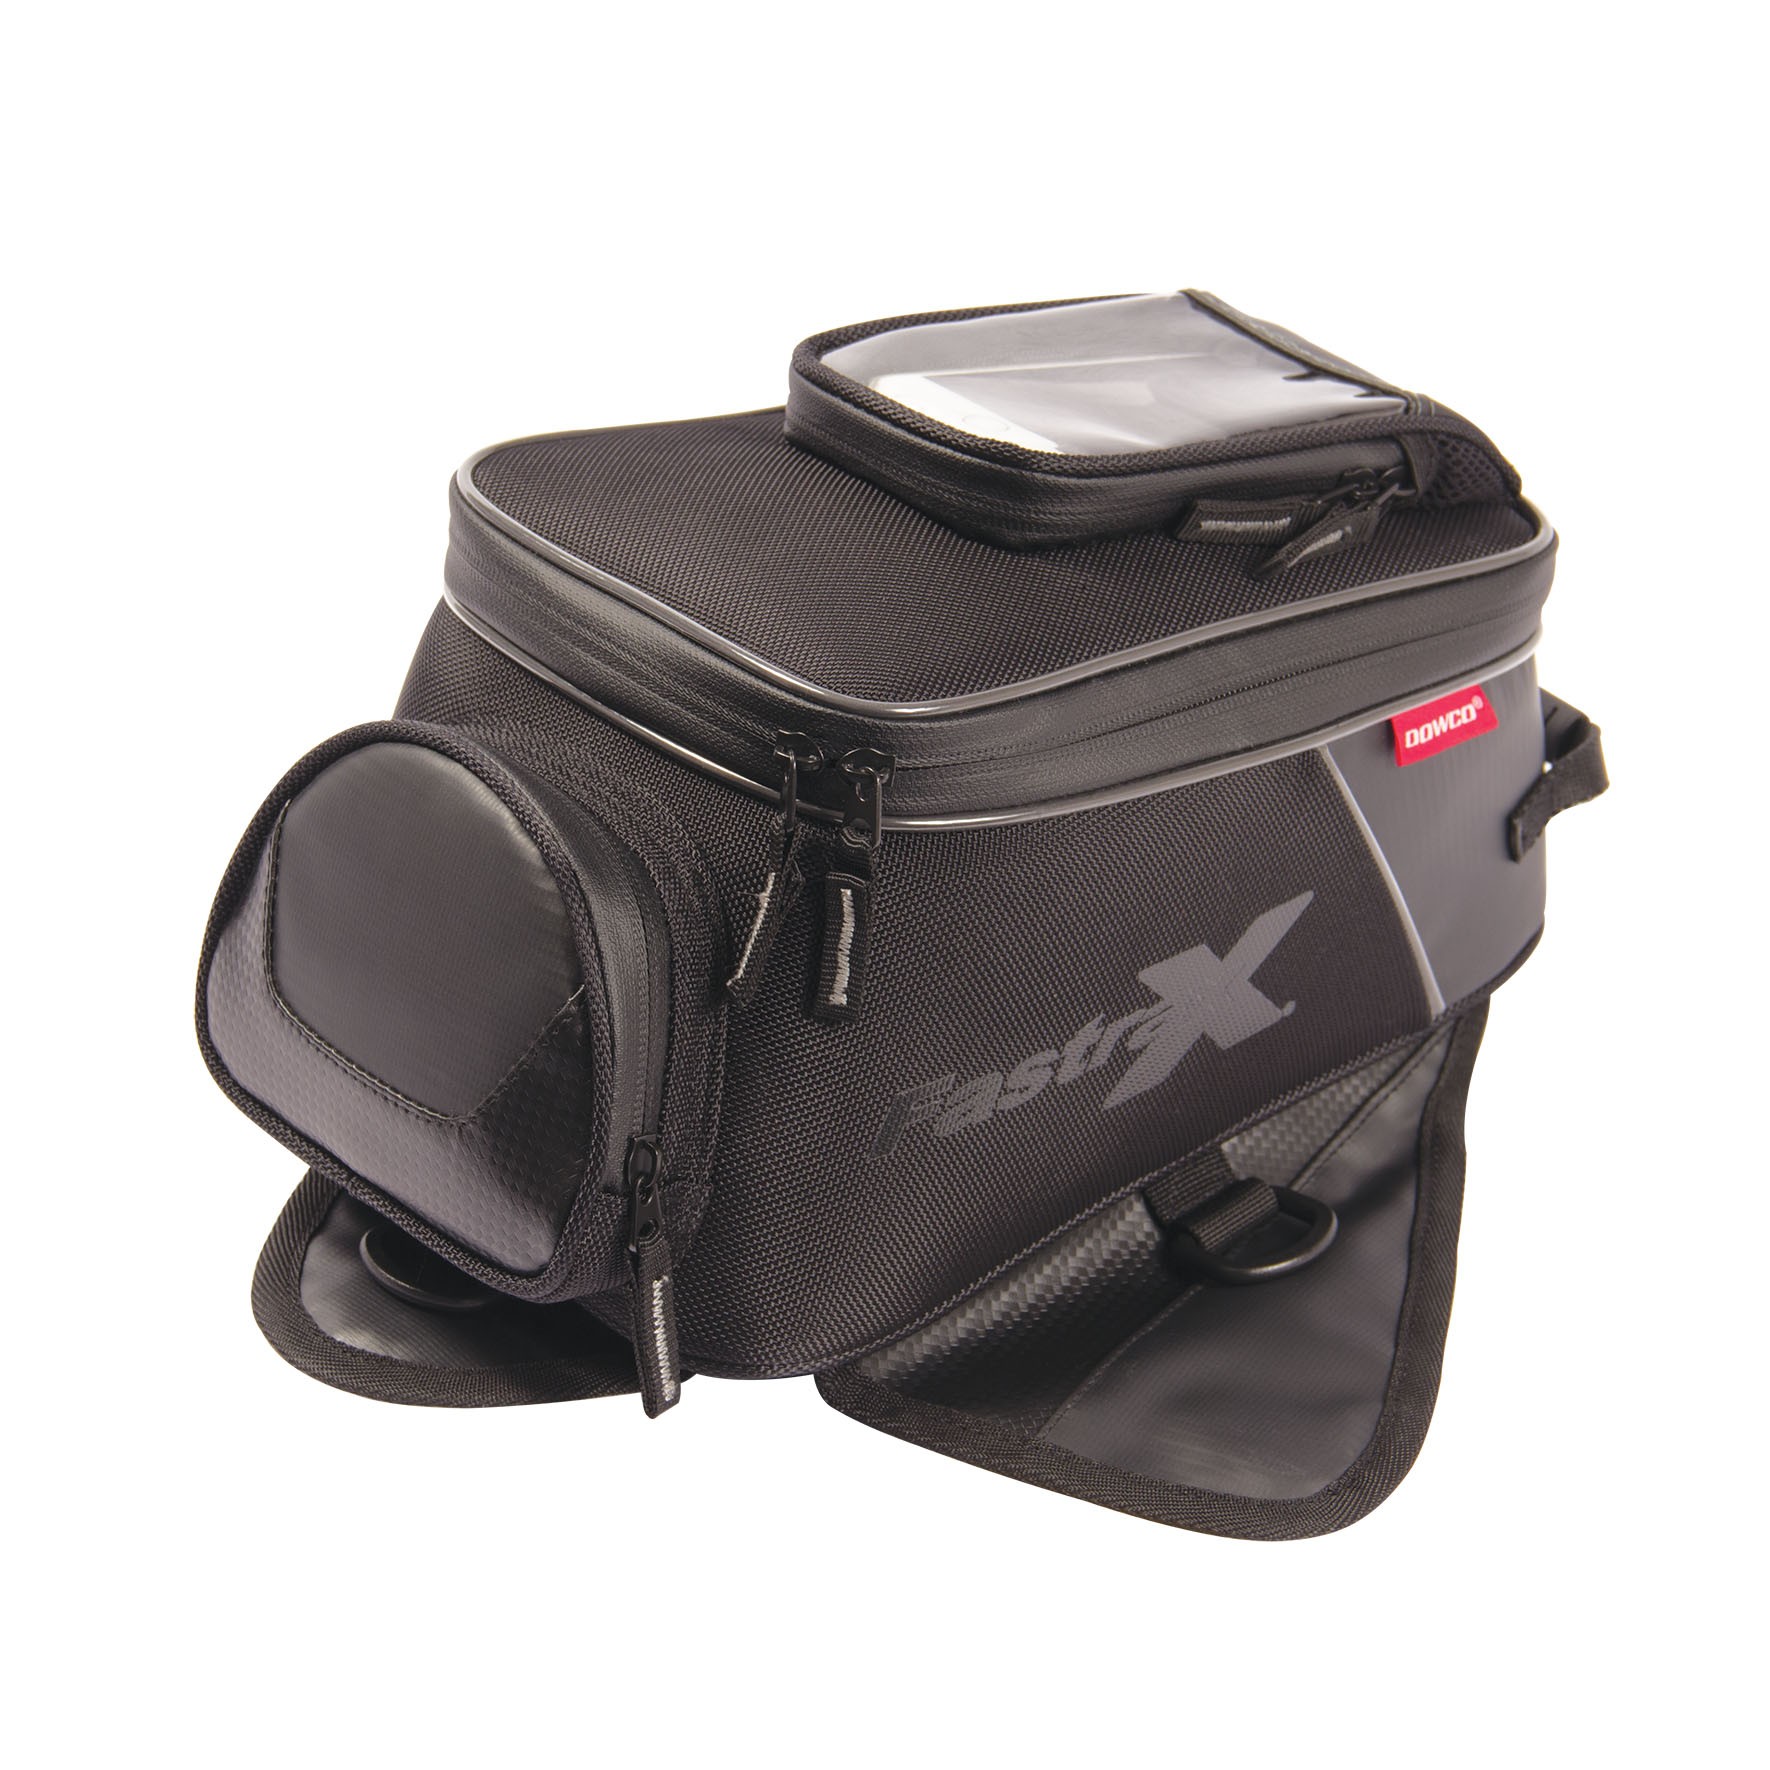 Dowco Fastrax Backroads Small Motorcycle Tank Bag